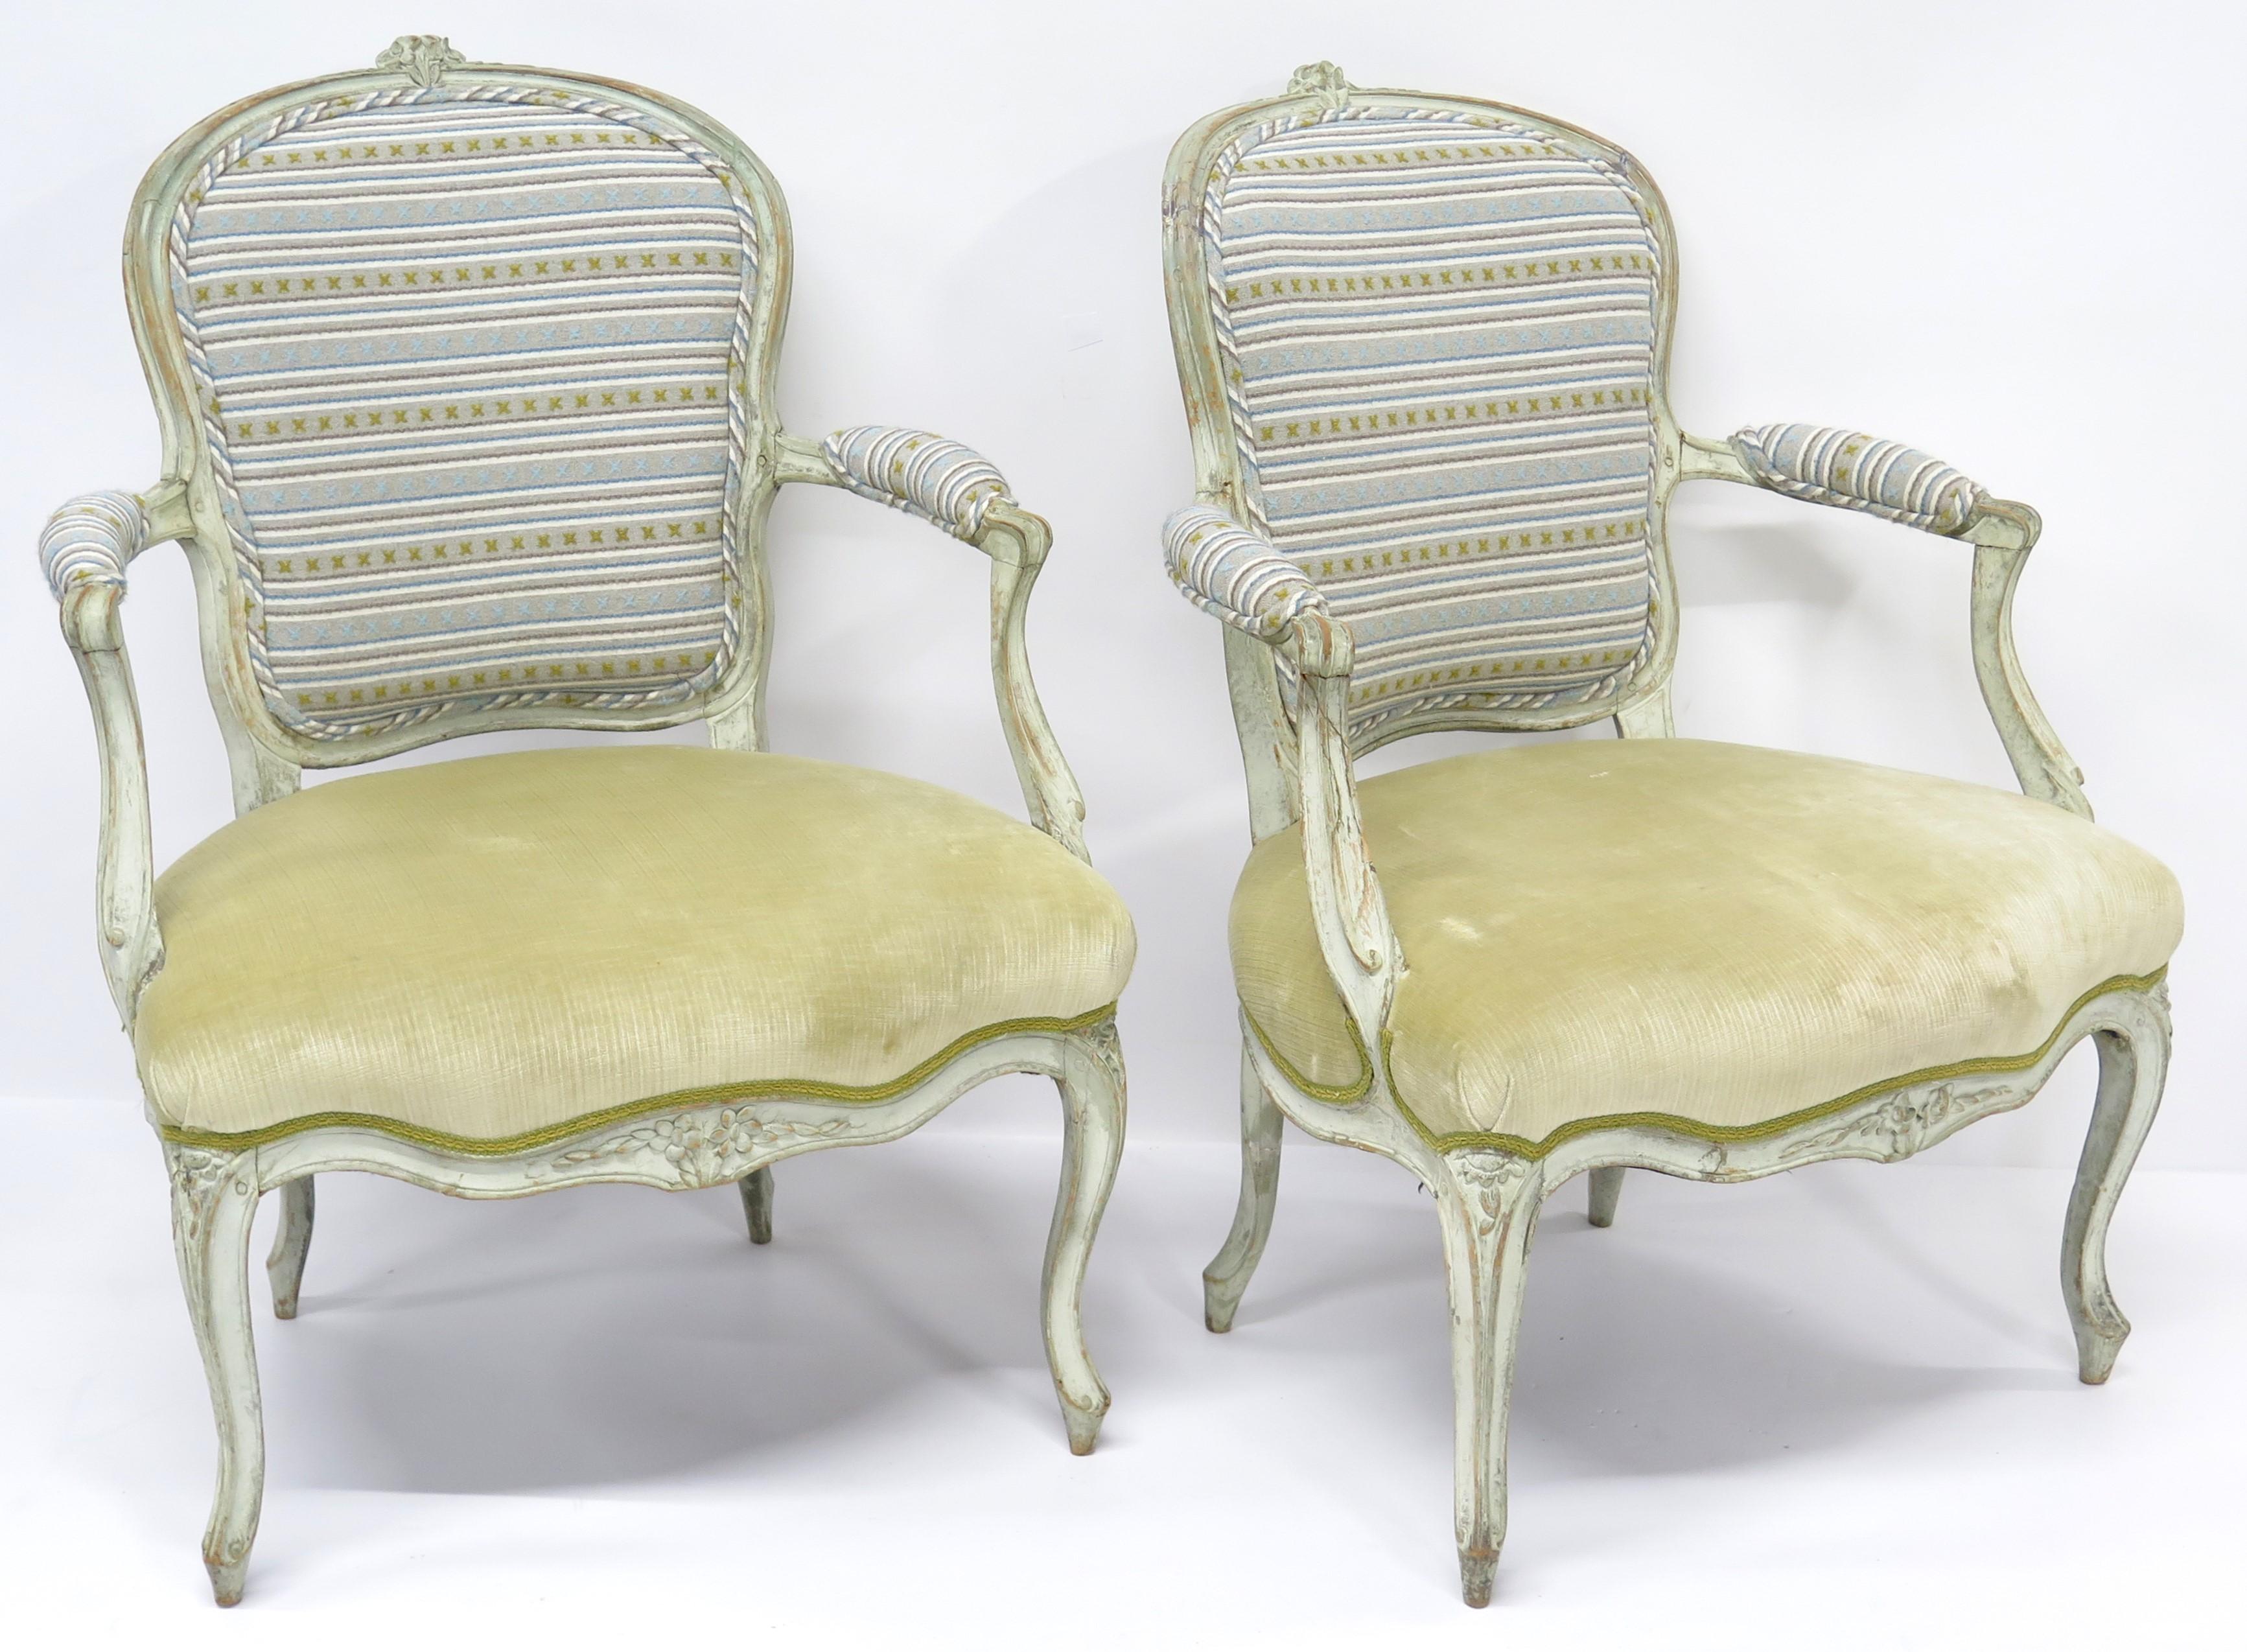 A nicely scaled pair carved and painted Louis XV Fauteuils  3rd quarter of the 18th Century. France. Circa 1760.

DIMENSIONS:

36